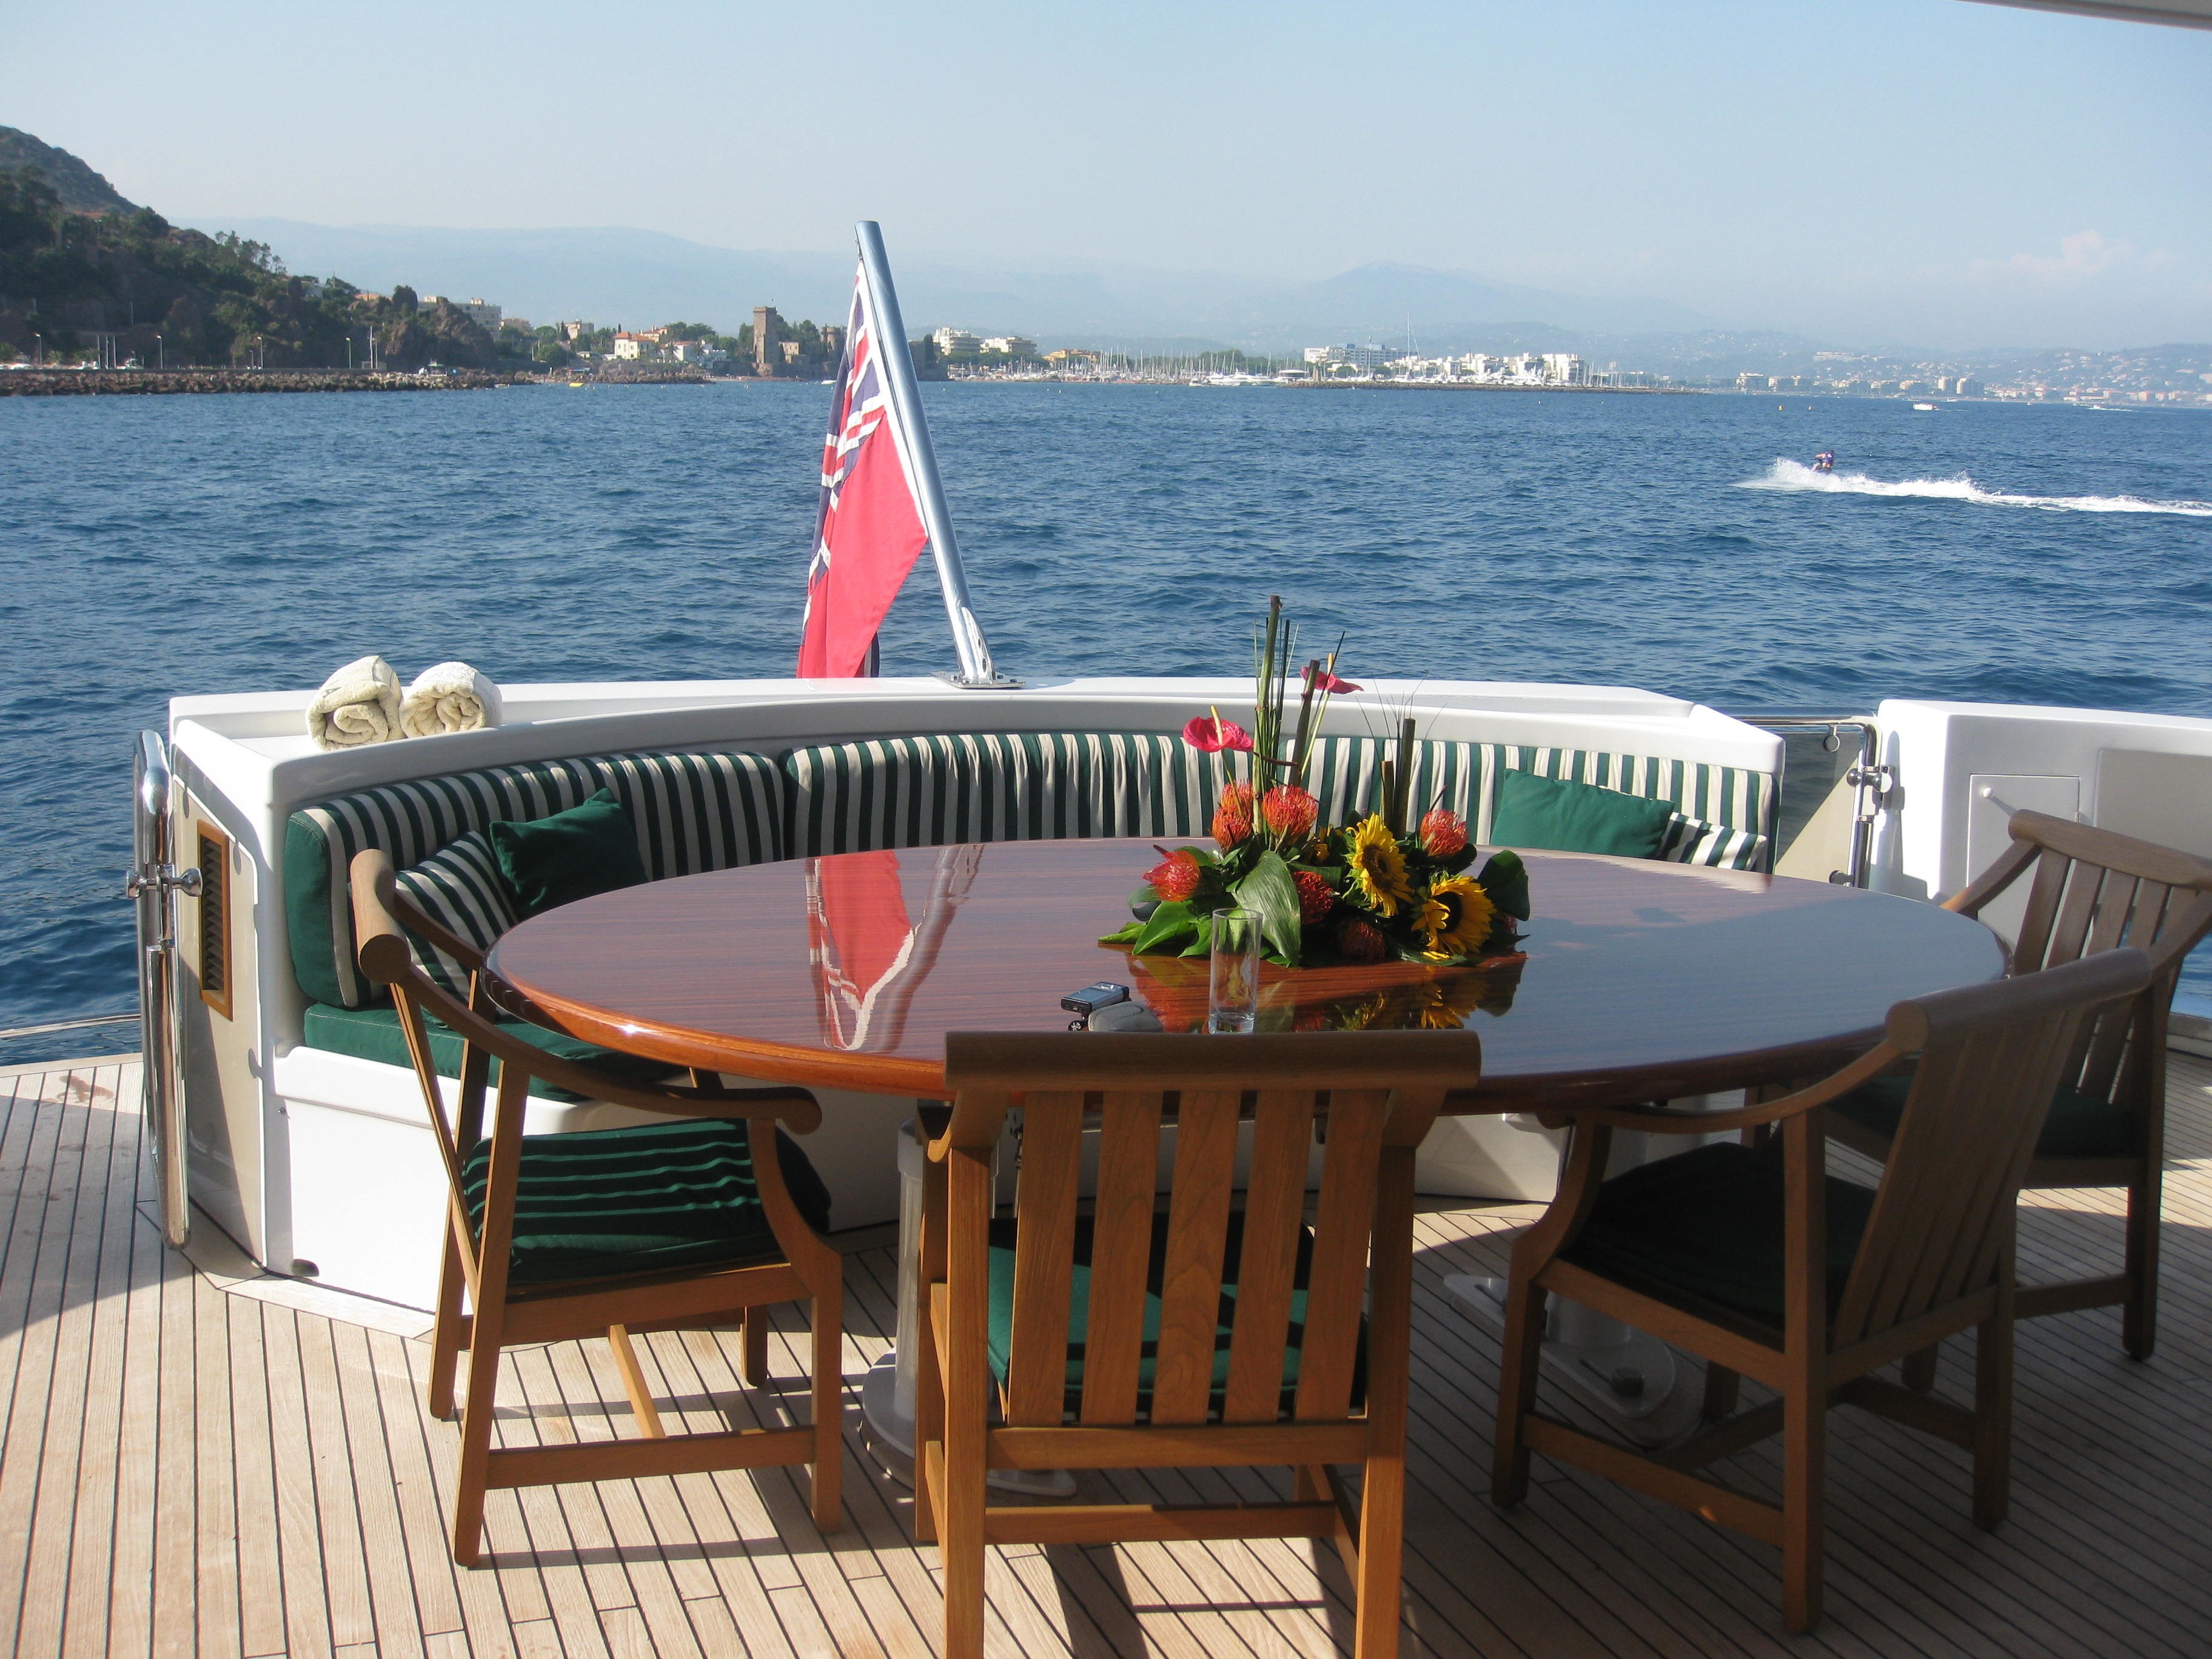 External Eating/dining Aboard Yacht PALM B